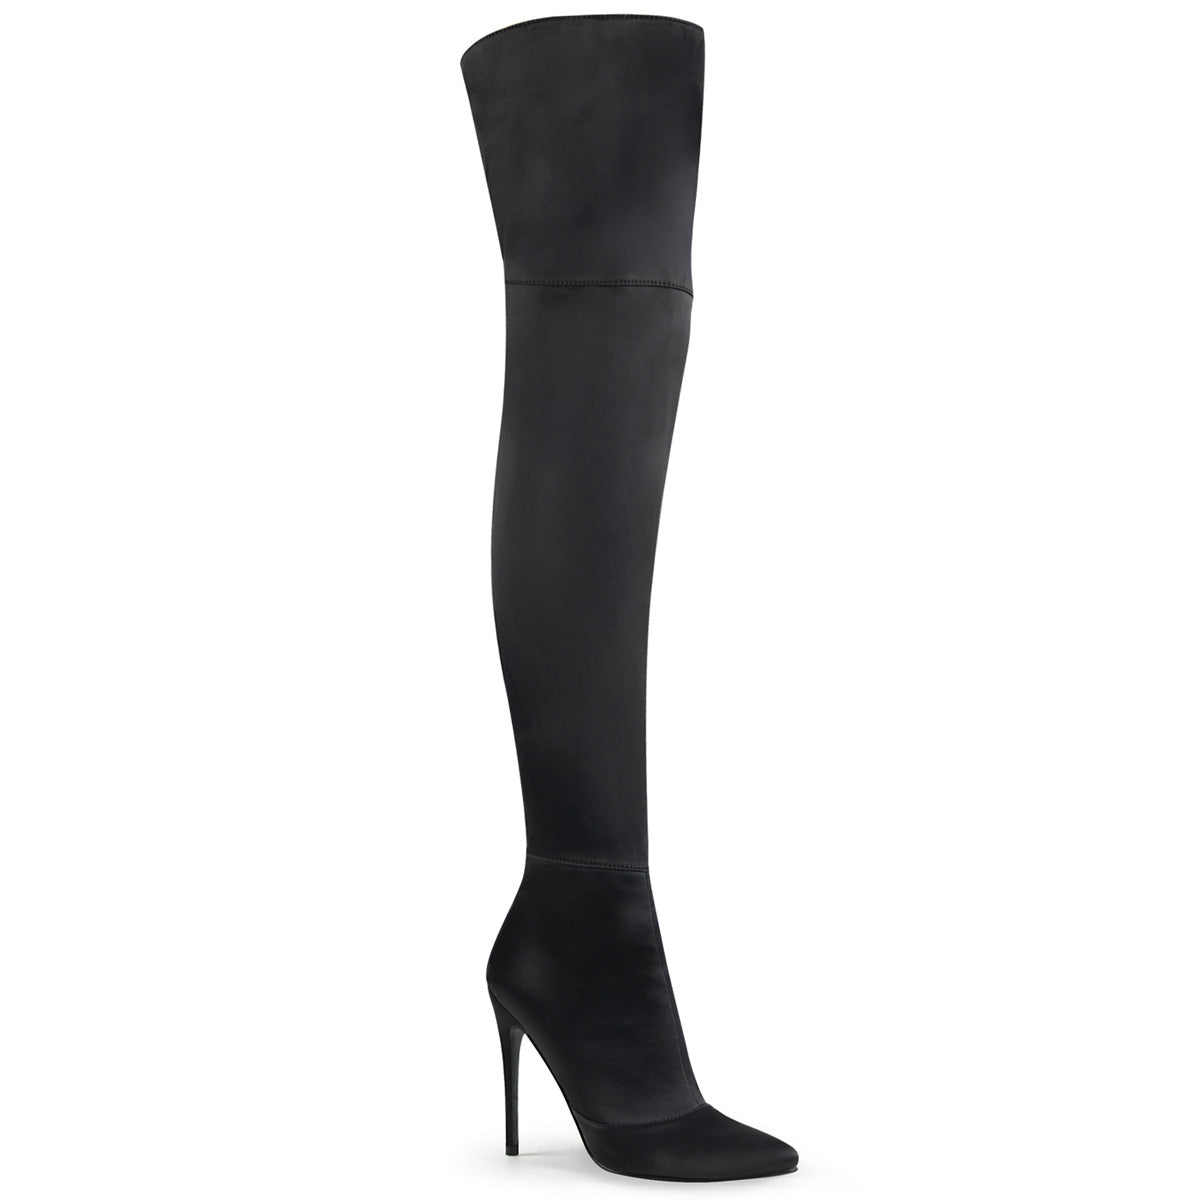 Pleaser Womens Boots. COURTLY-3012 BLK Stretch Satin